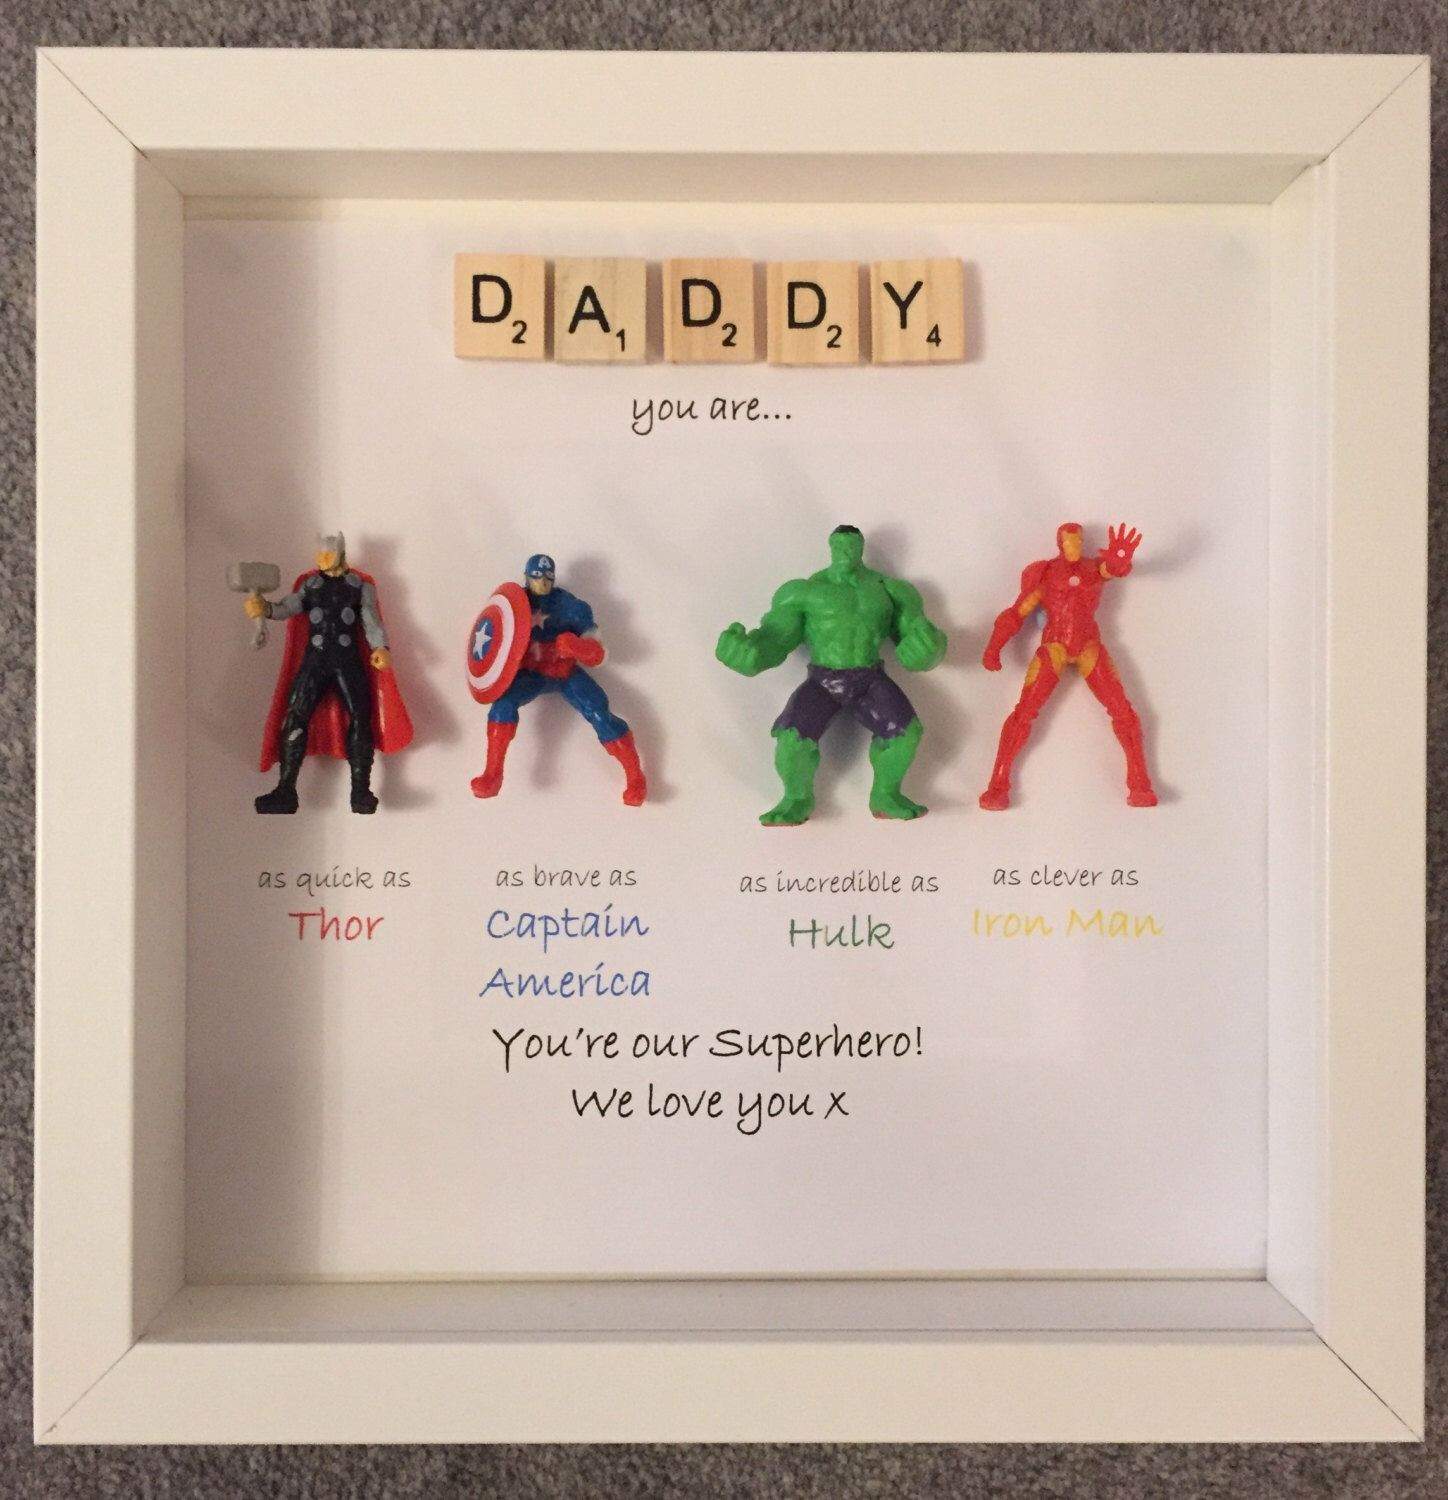 Homemade Birthday Gift Ideas For Dad From Daughter
 Avengers Superhero figures frame t Ideal for dad